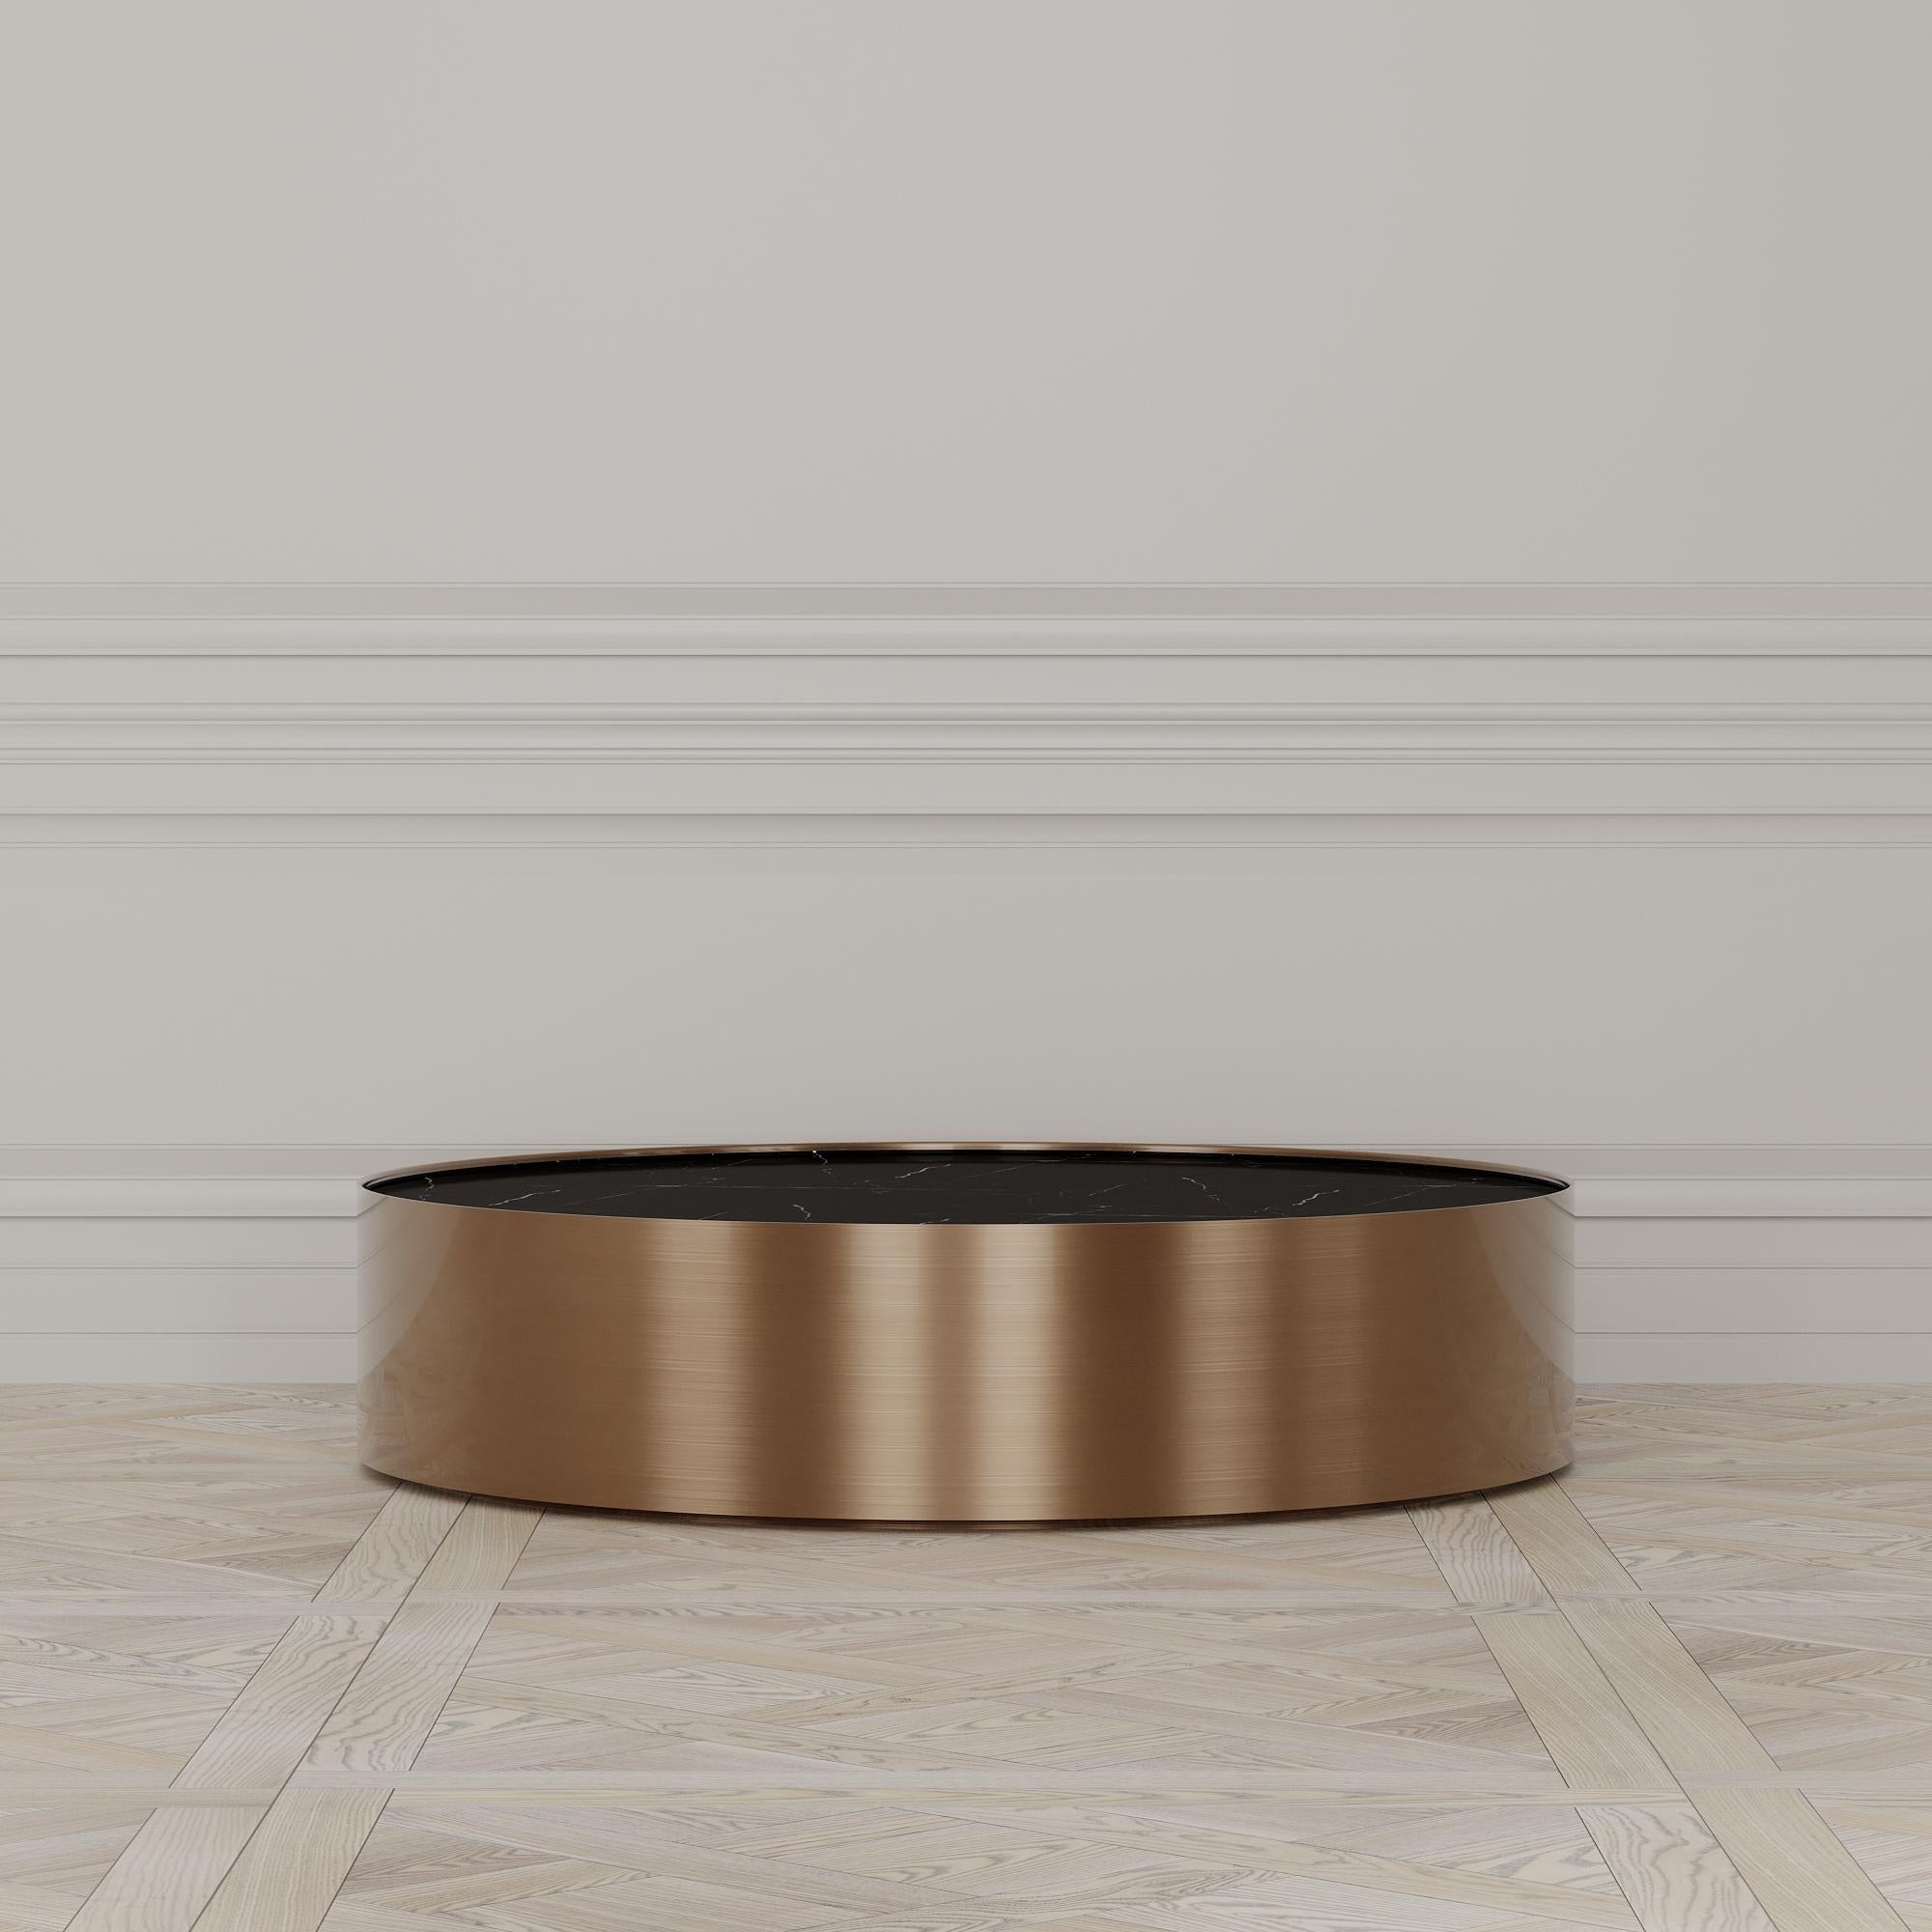 The Afterglow coffee table is designed by Emél & Browne in the minimalist and contemporary style and custom made in Italy by skilled artisans.

The Circular Nero Marquina marble top evokes the certainty of the coming night, and acts as a back-drop